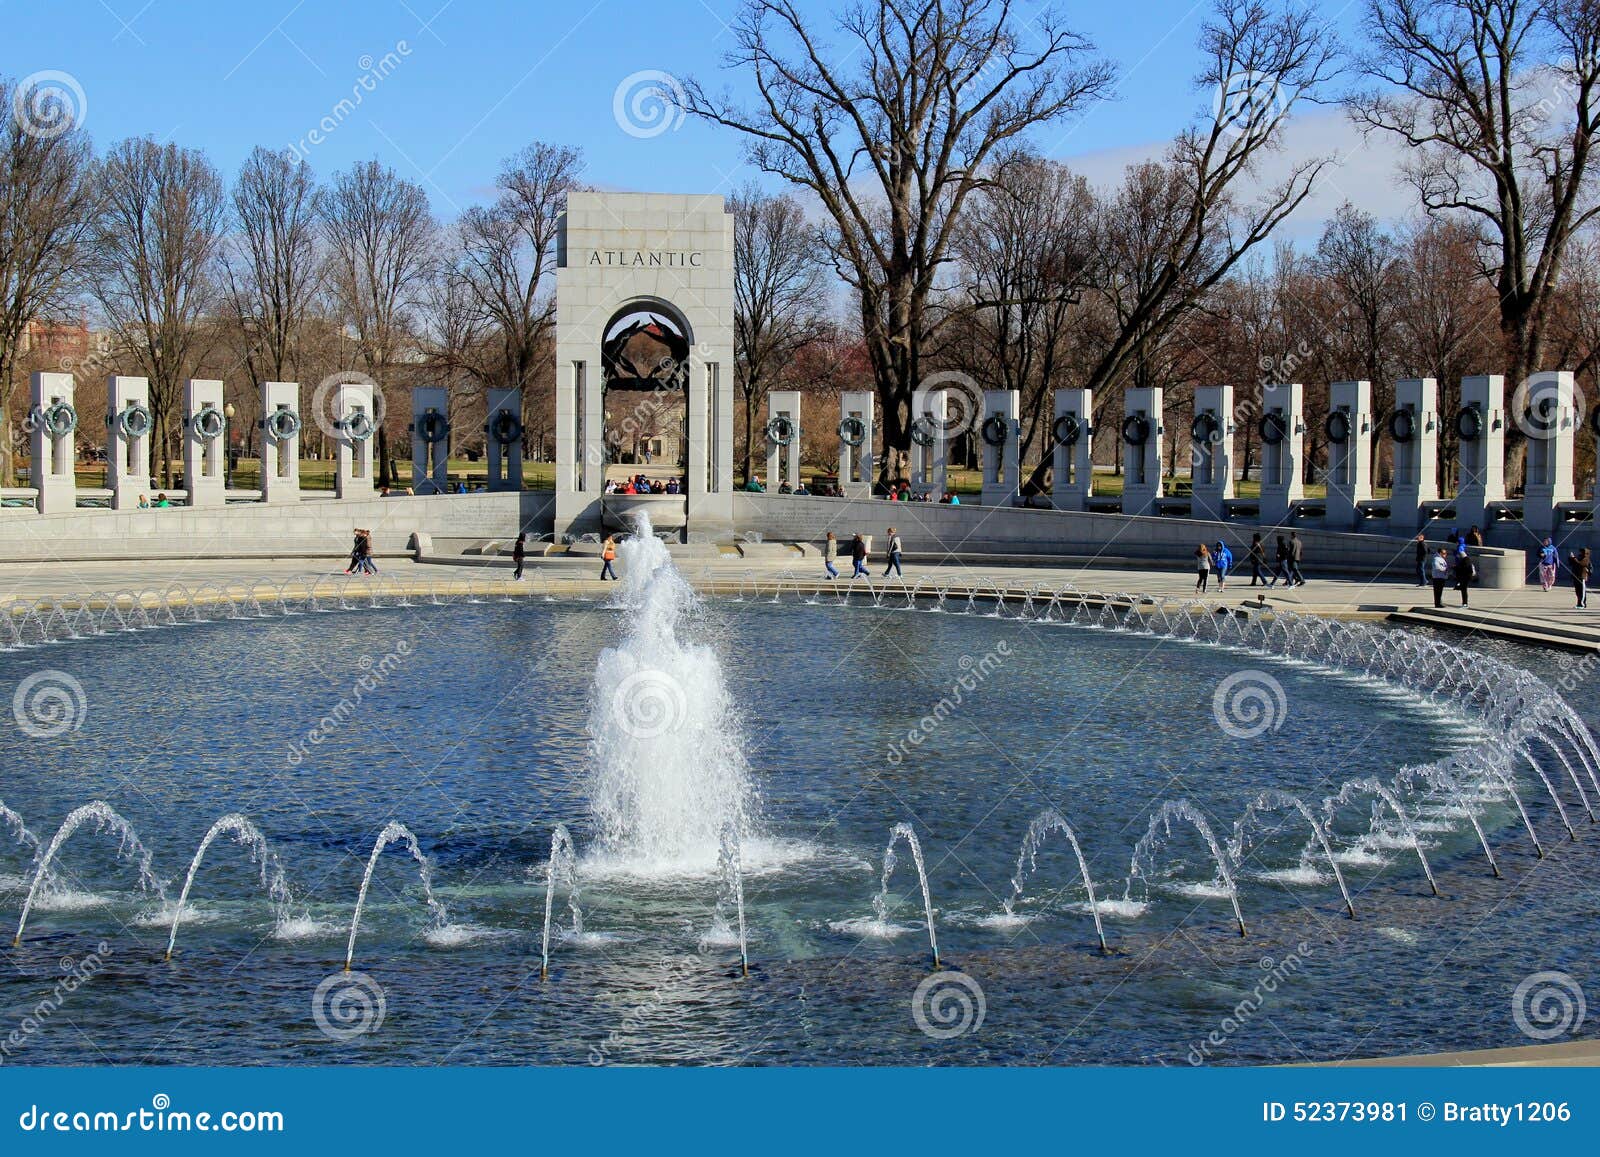 early-morning-hours-with-people-gathered-around-wwii-memorial-washington-dc-march-2015